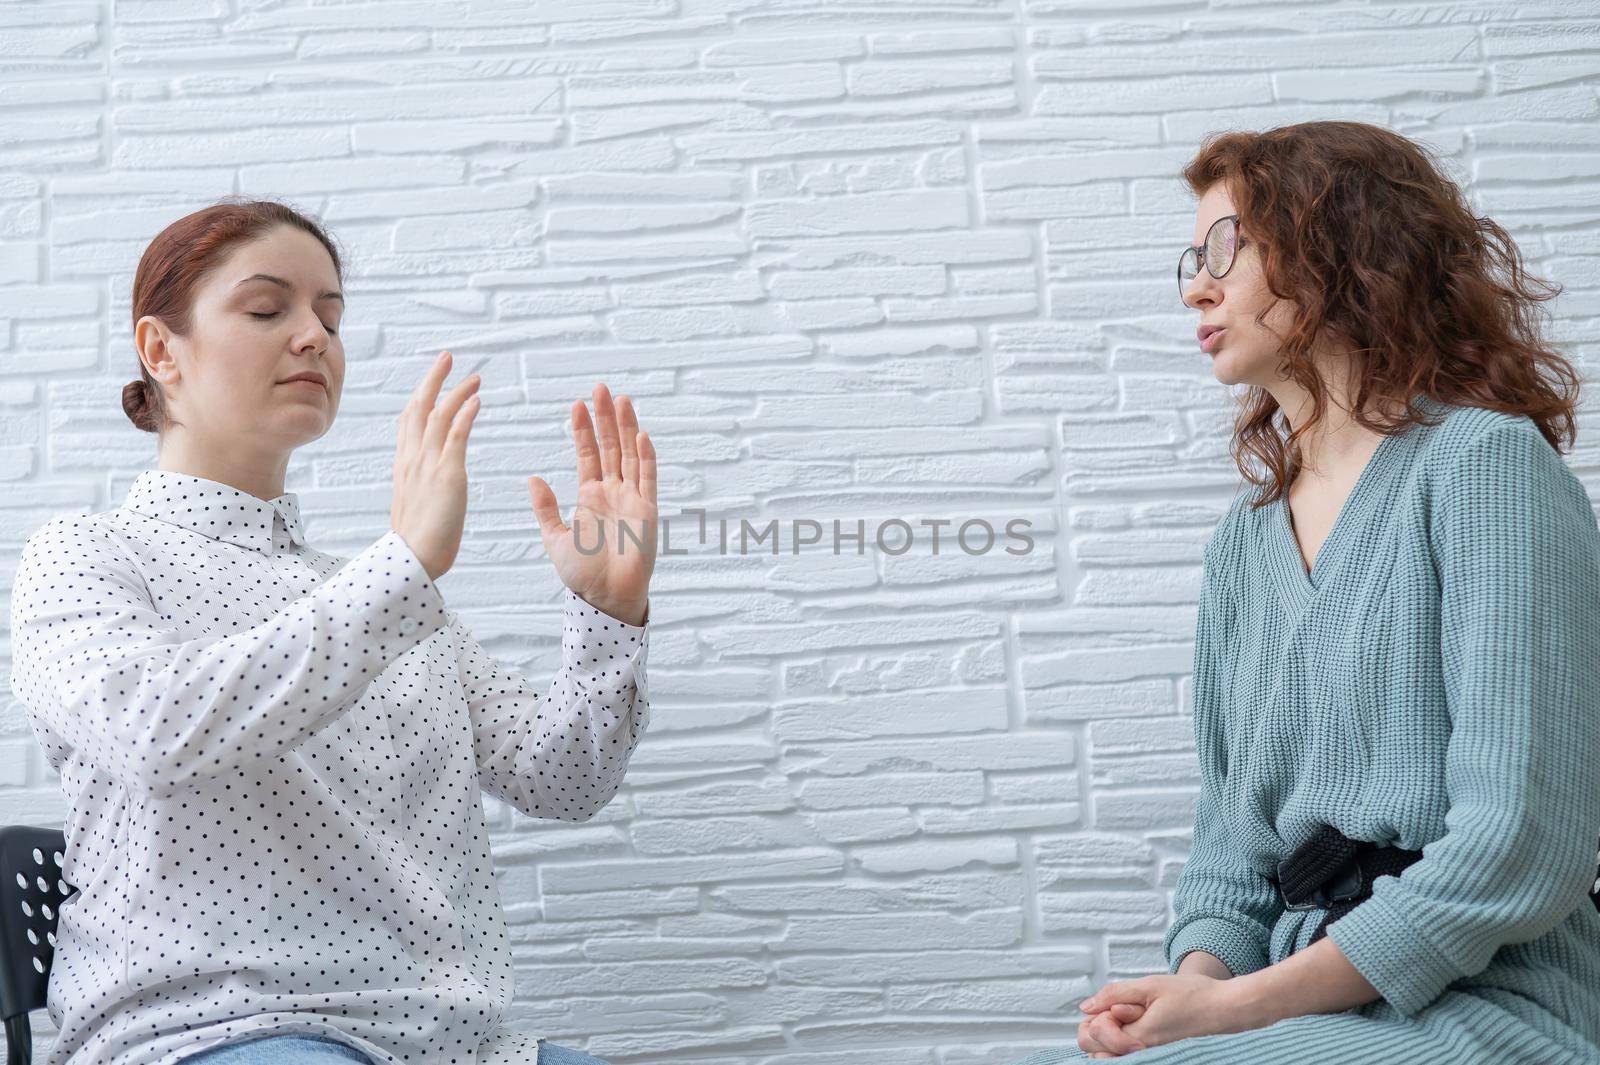 The psychotherapist conducts a hypnosis session. Female patient under hypnosis